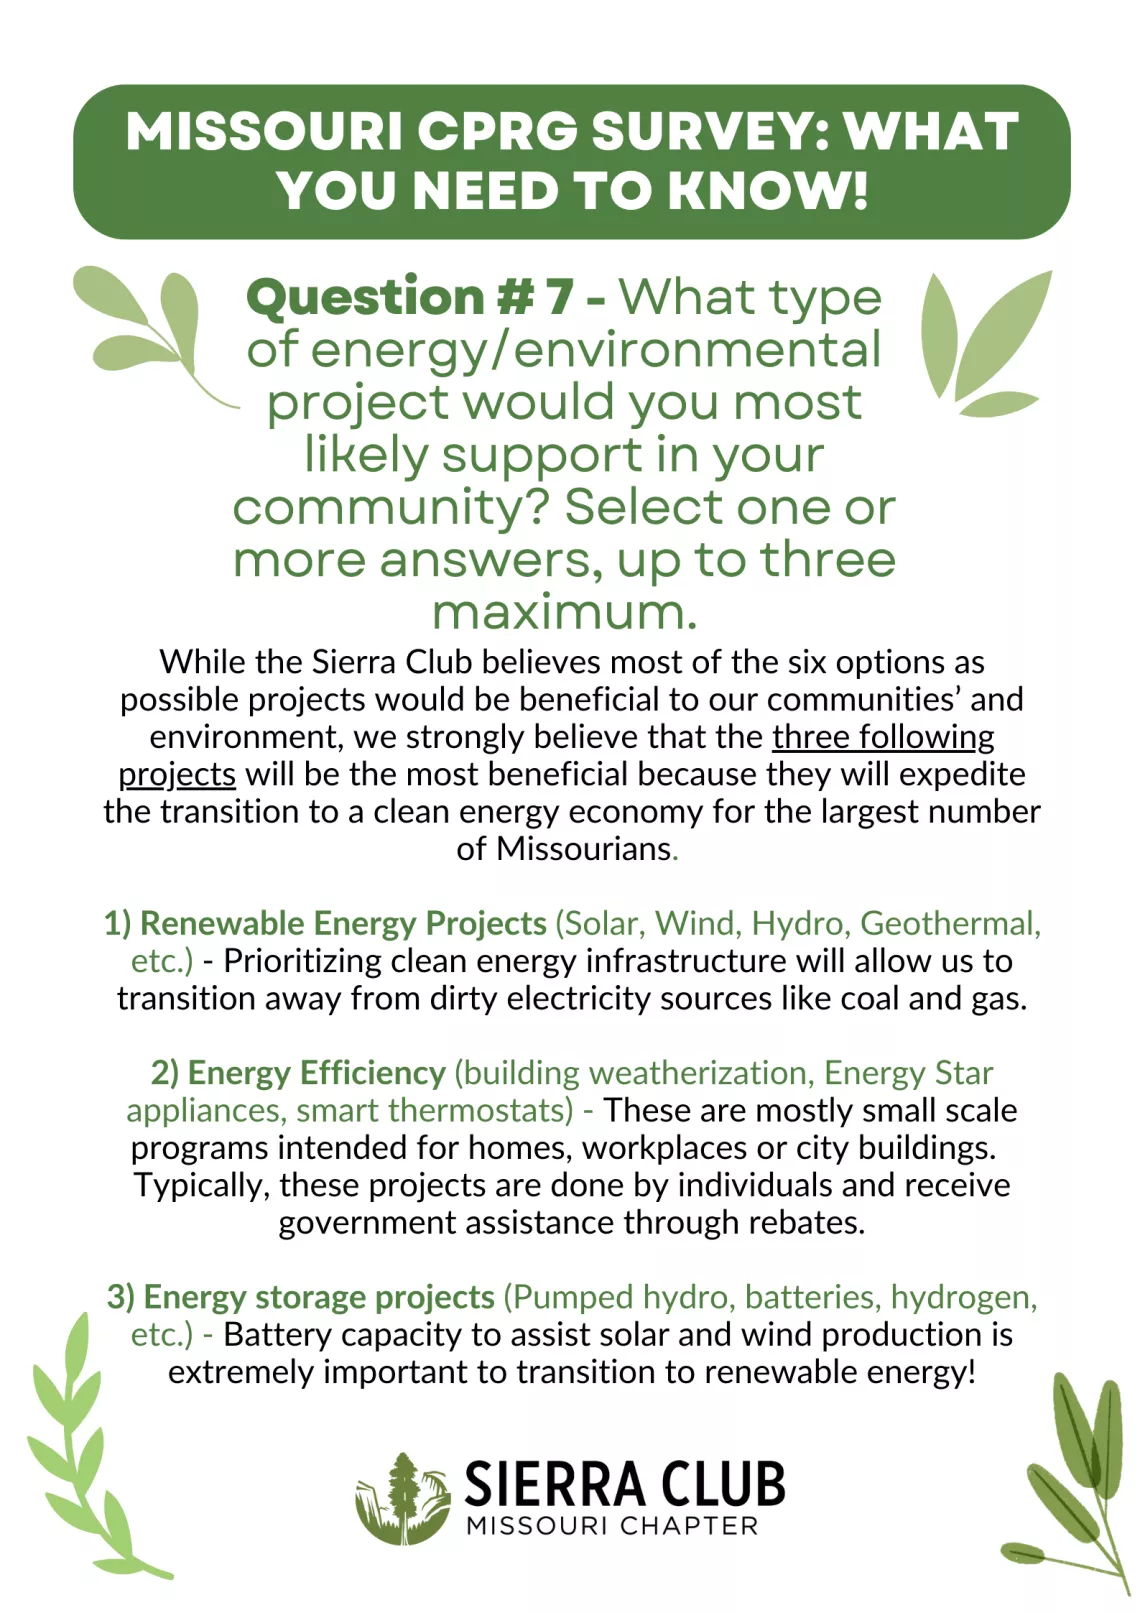 Voter Guide Question 7 - Why we support renewable energy, energy efficiency, and energy storage projects!